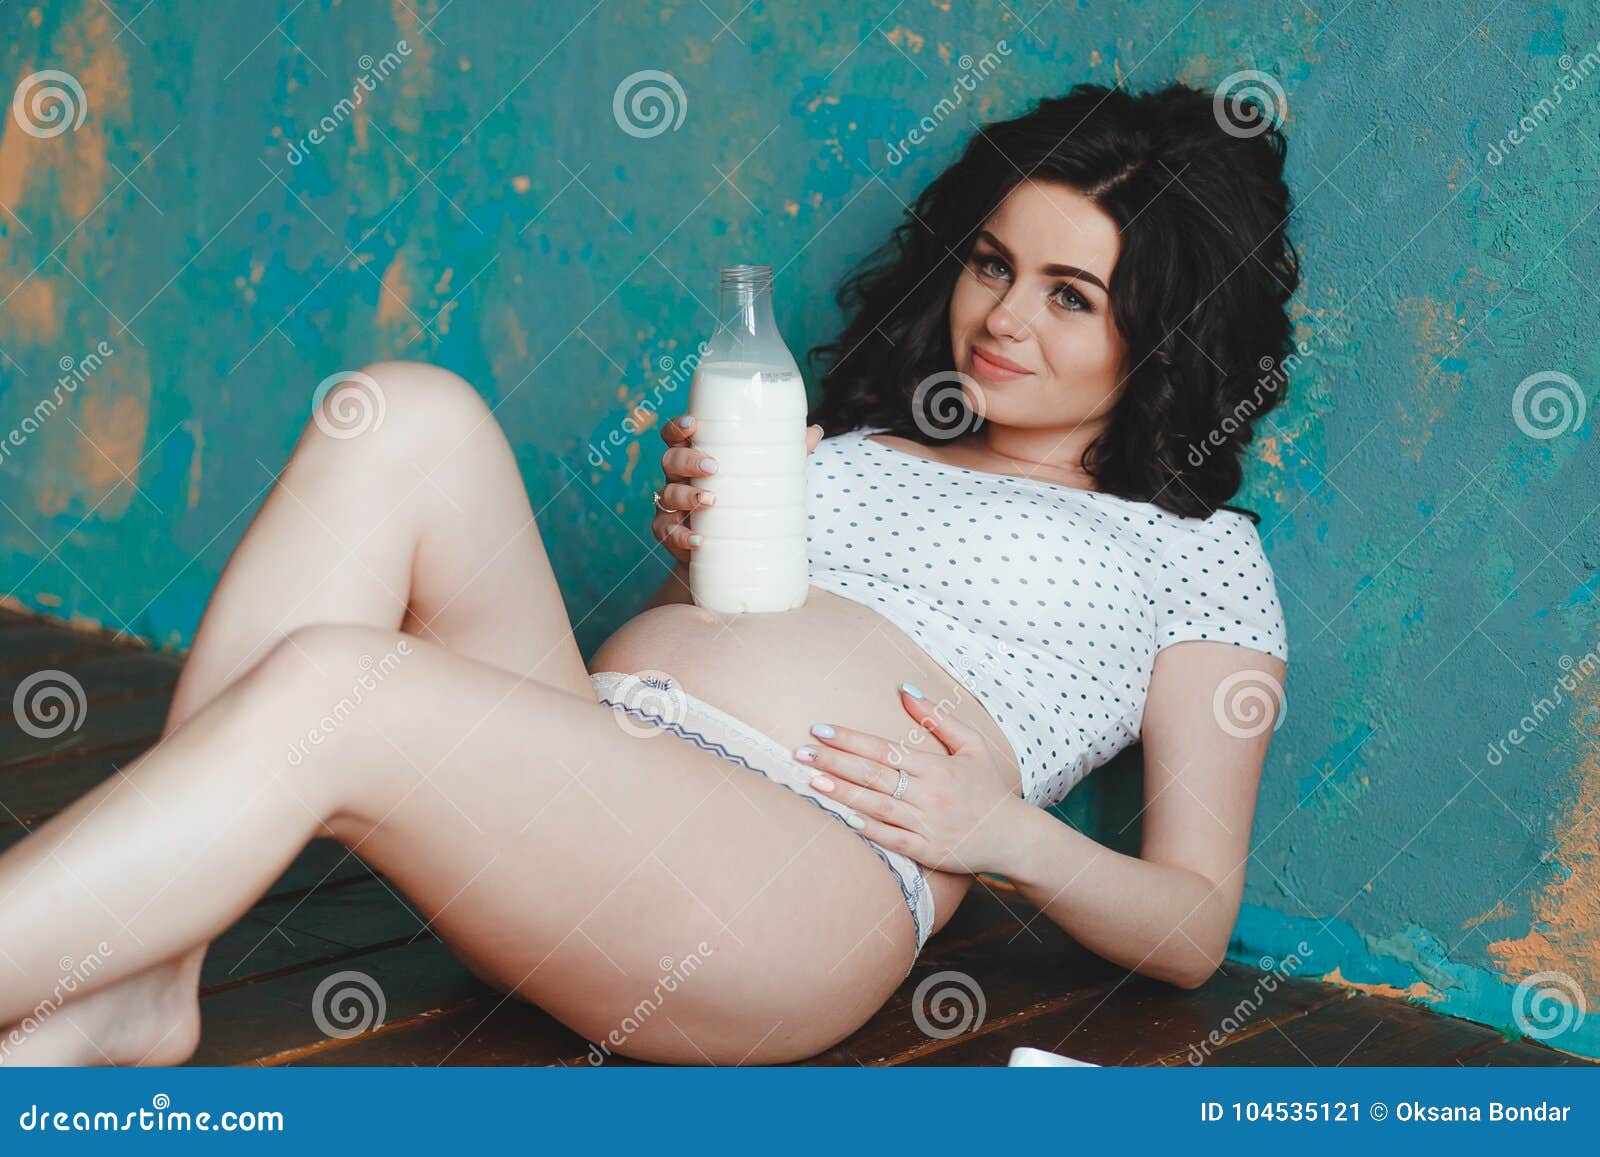 Pregnant Woman Holding Milk Bottle Nourish The Fetus And Her Body To